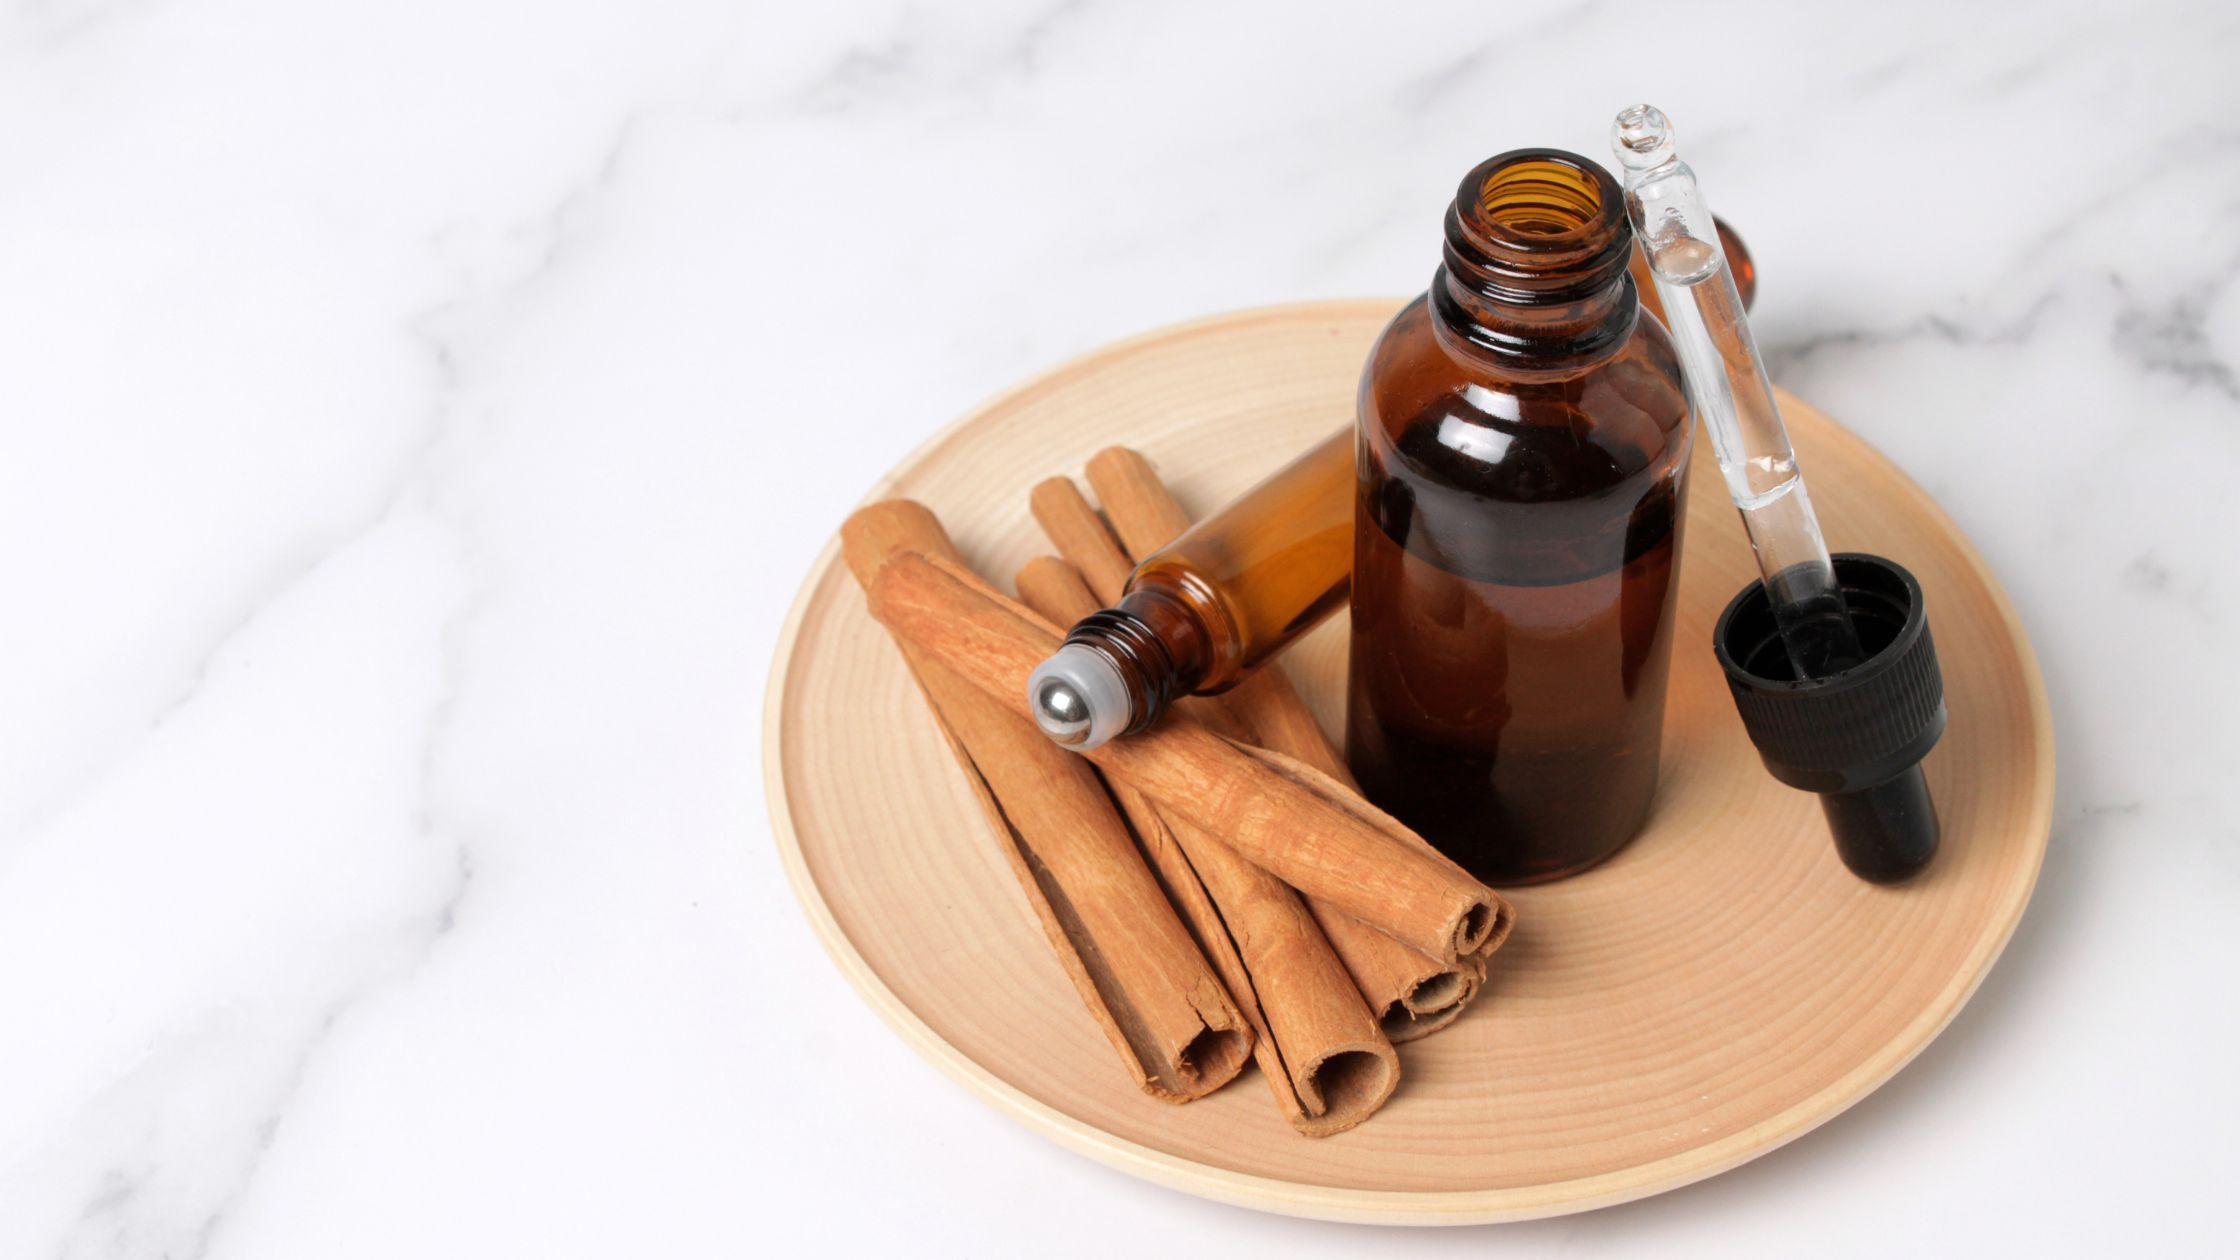 Cinnamon stick sitting next to an open essential oil bottle and dropper